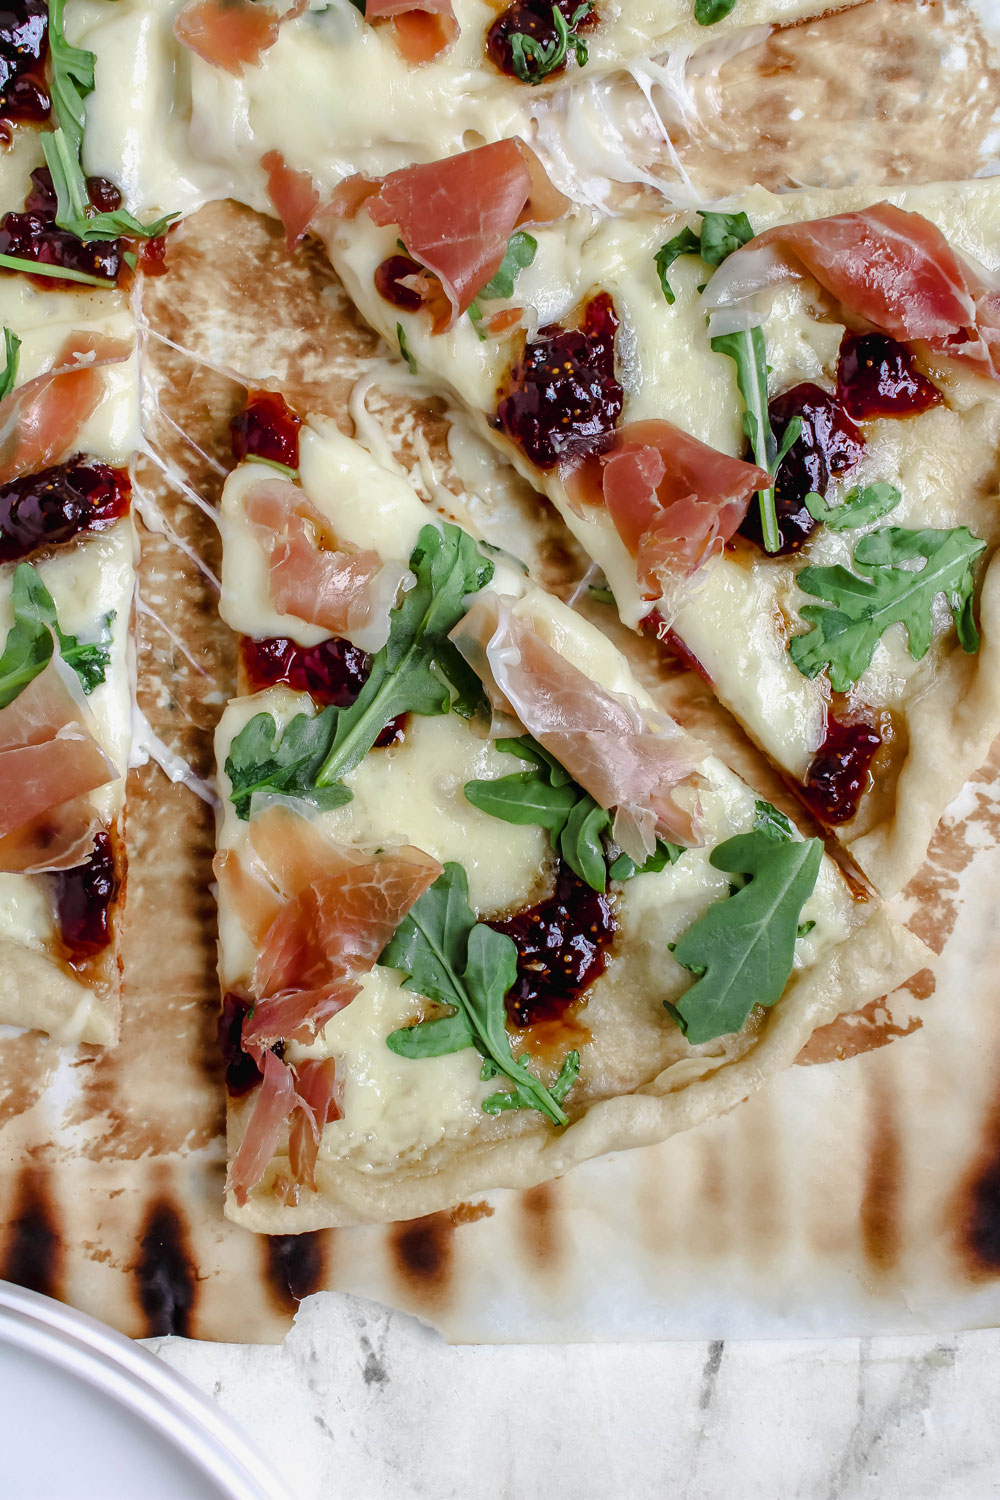 A top-down image of a prosciutto, brie, and fig jam pizza with a few pieces pulled out to show the melty cheese.